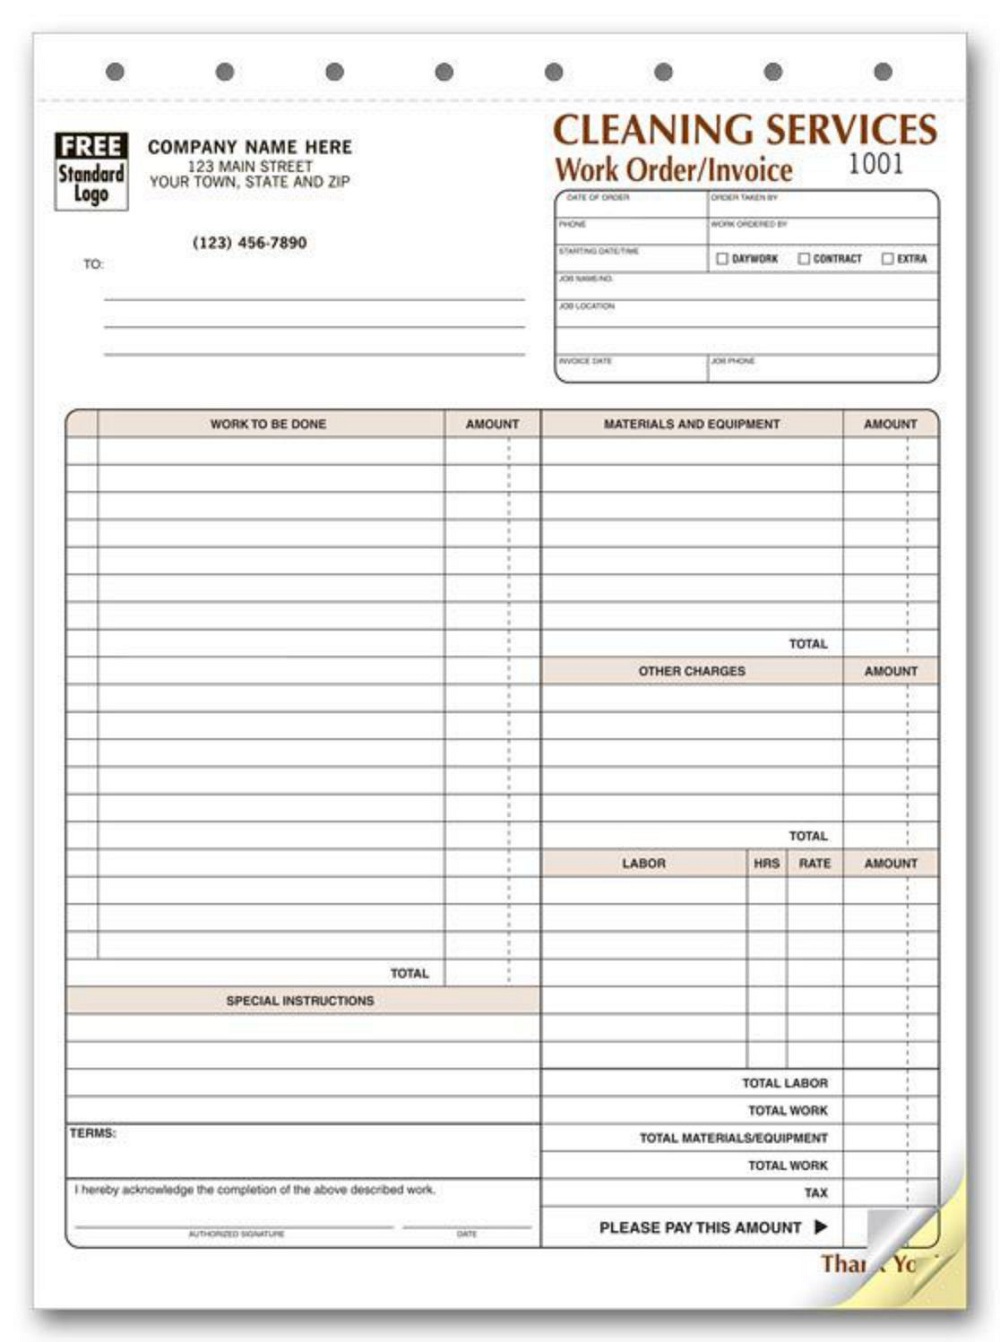 Generic Cleaning Business Estimate Form